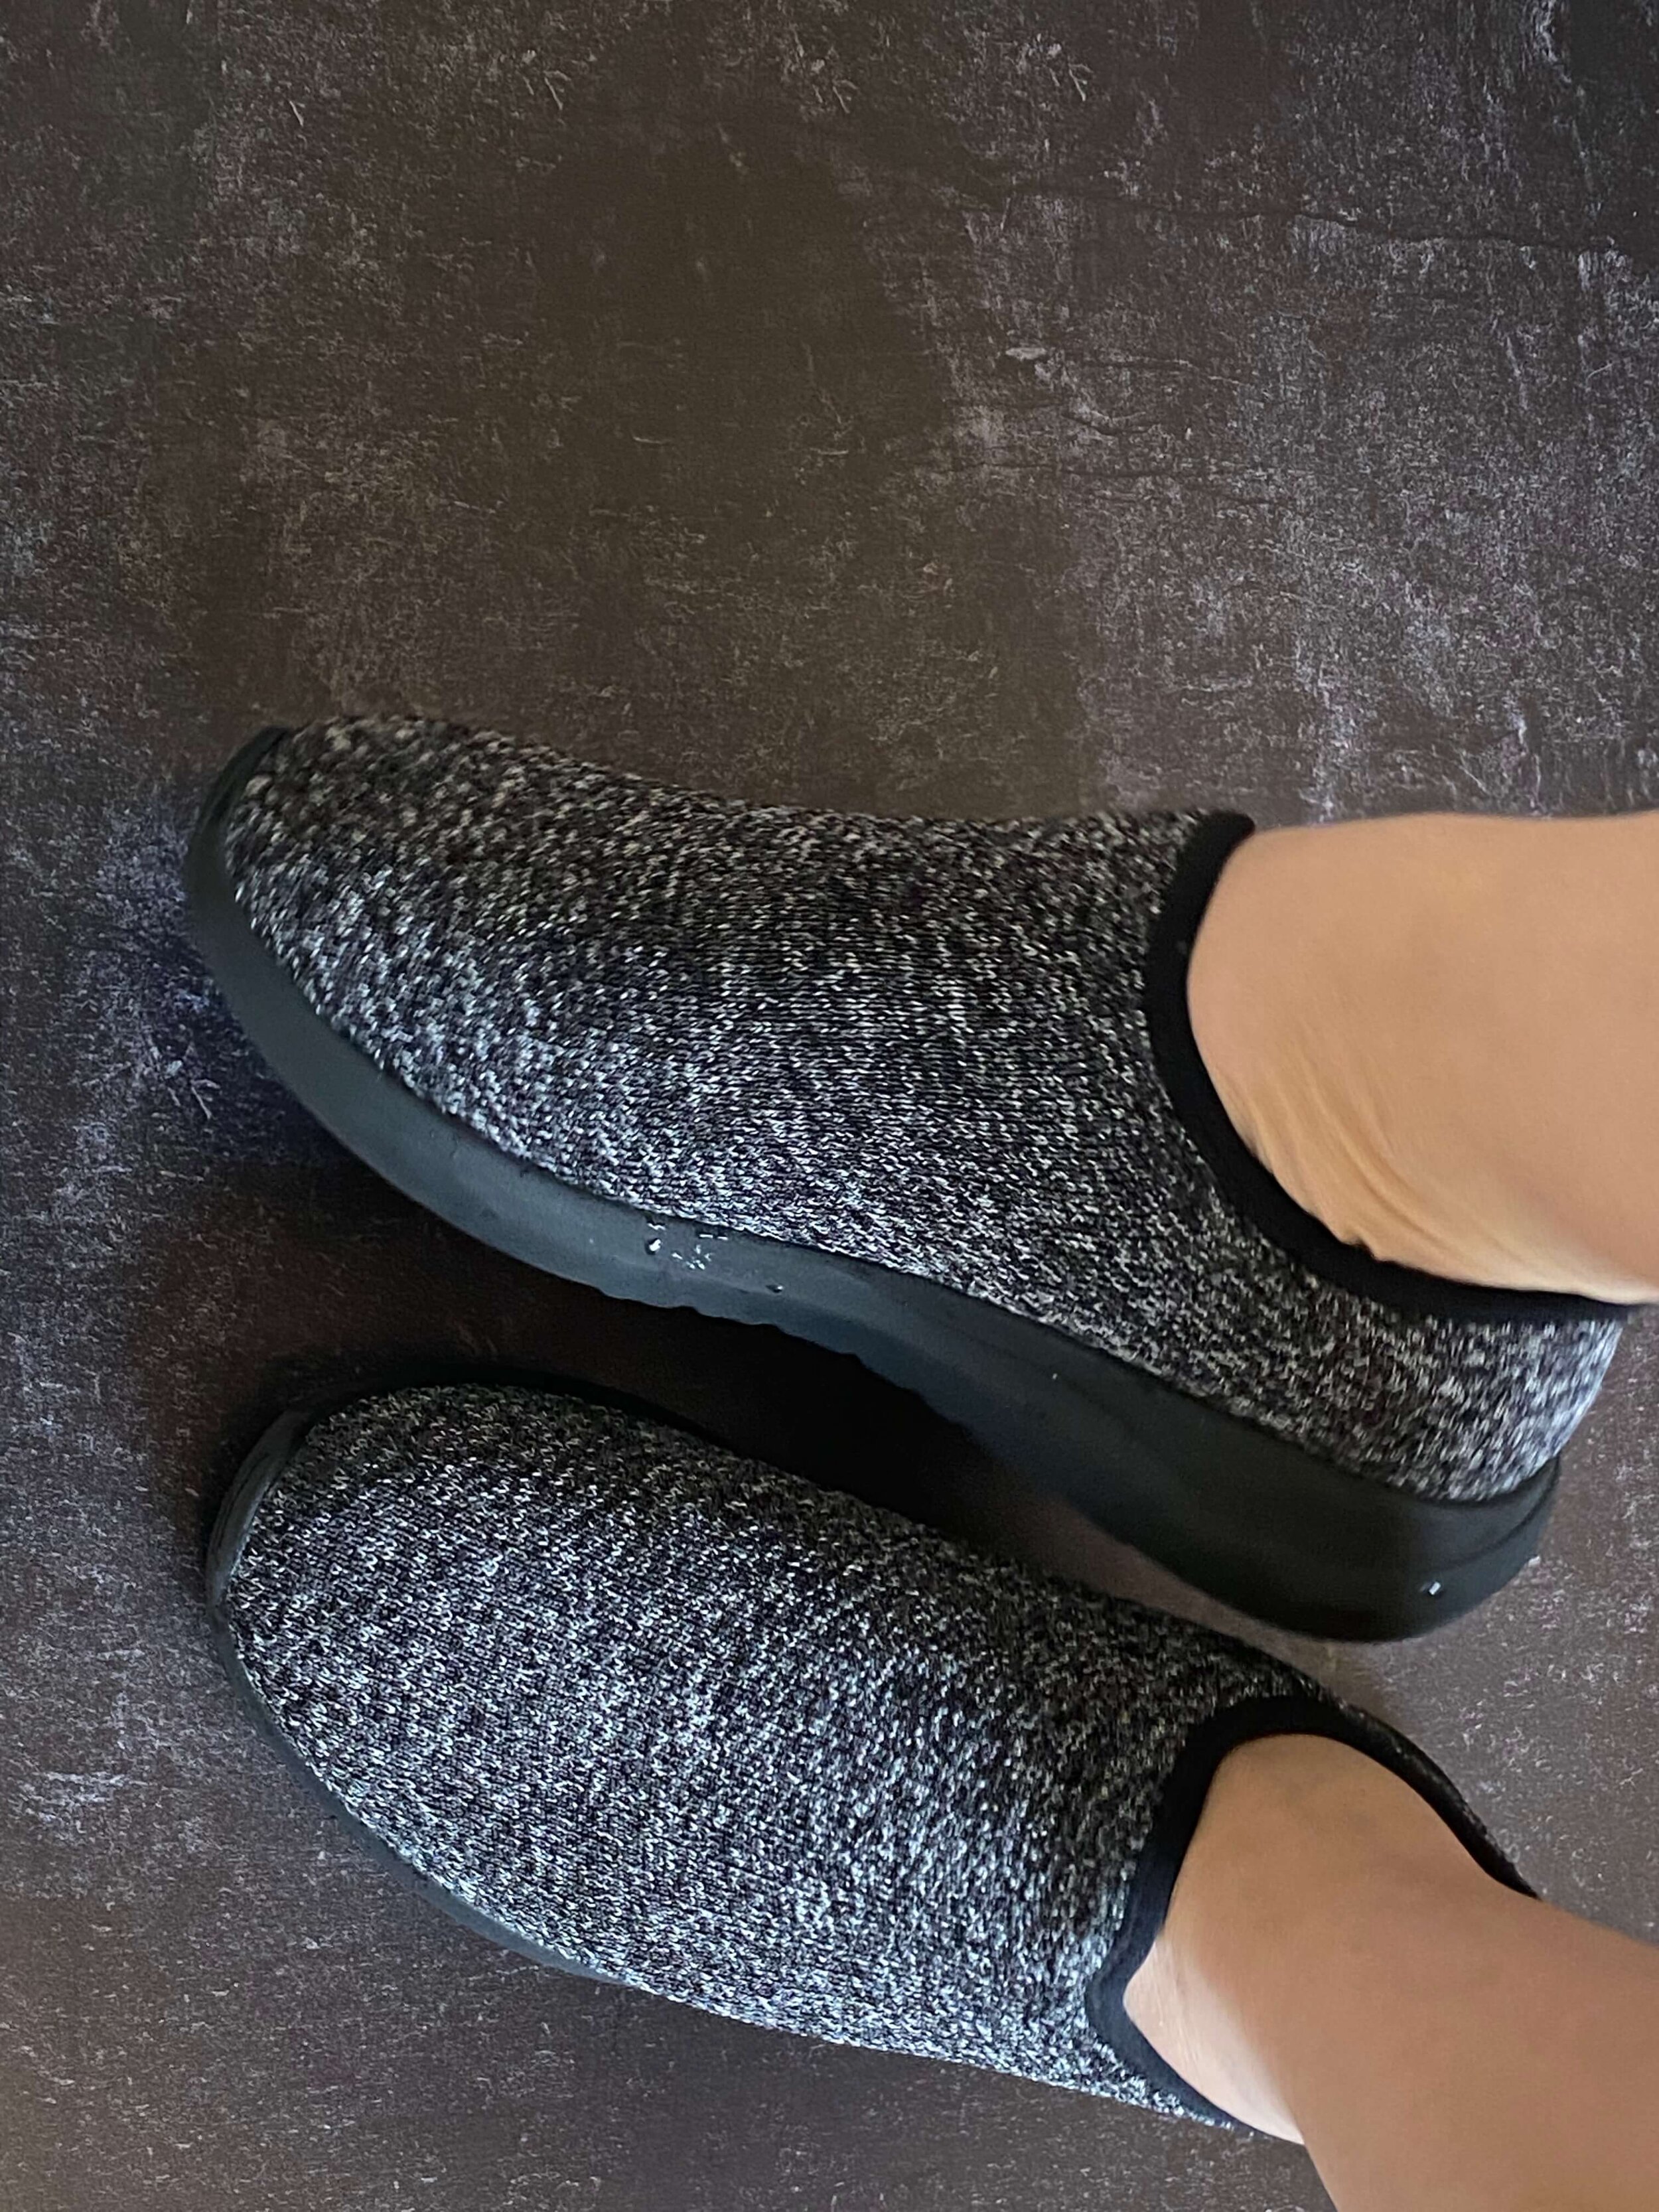 100% Waterproof Merino Wool Shoes V-Tex tested and reviewed — Phil and Mama